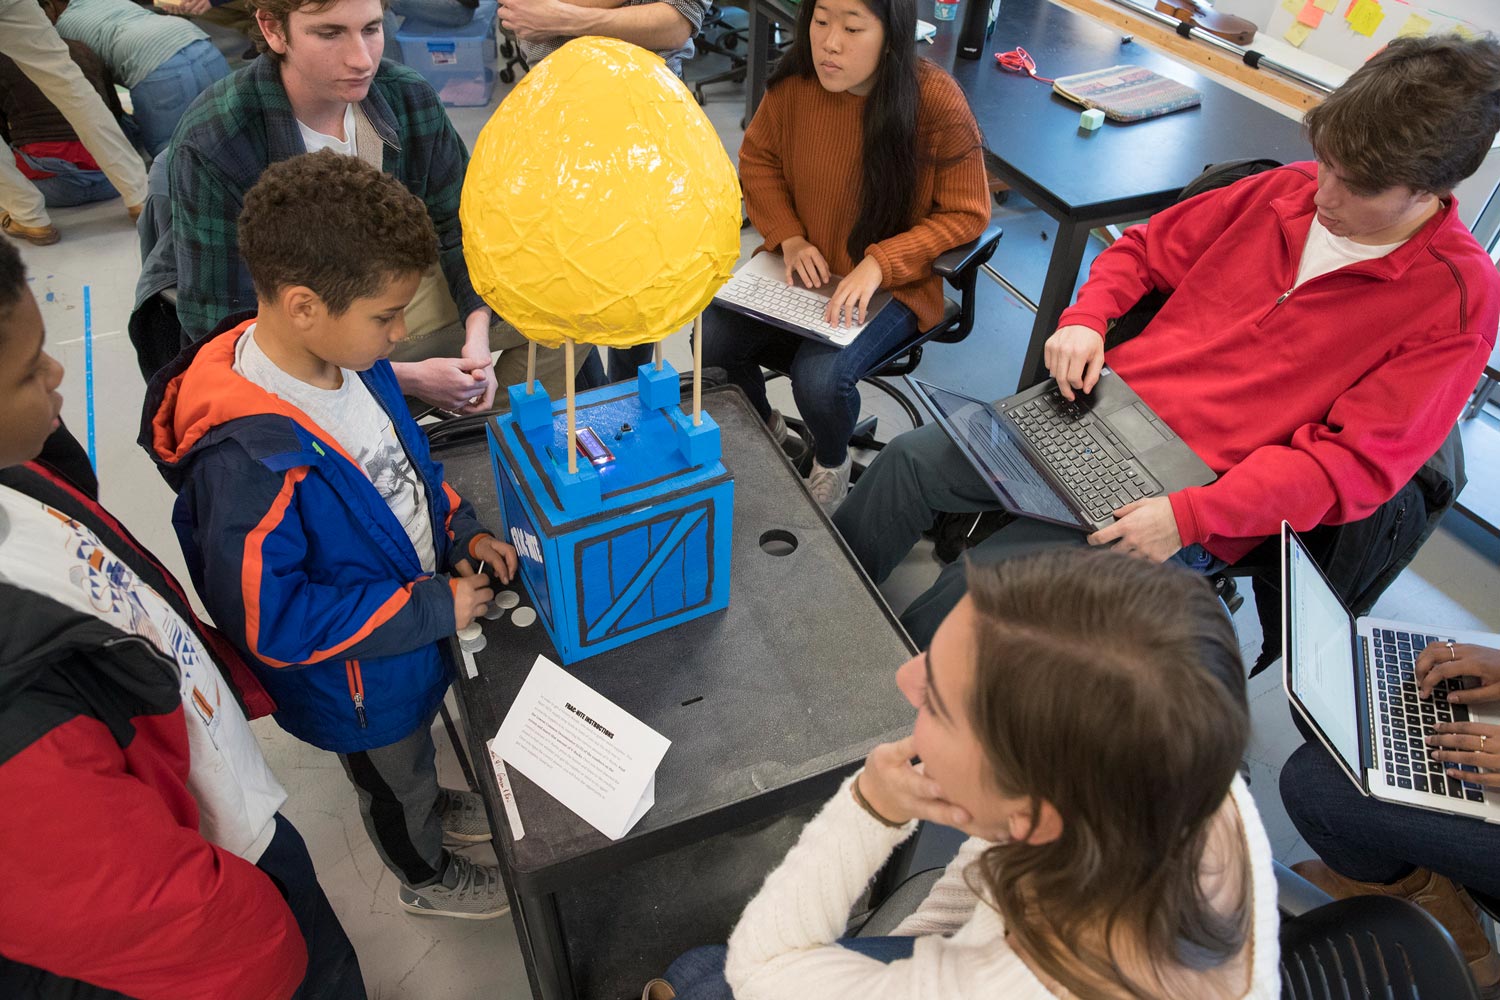 UVA students watch small children interact with a toy